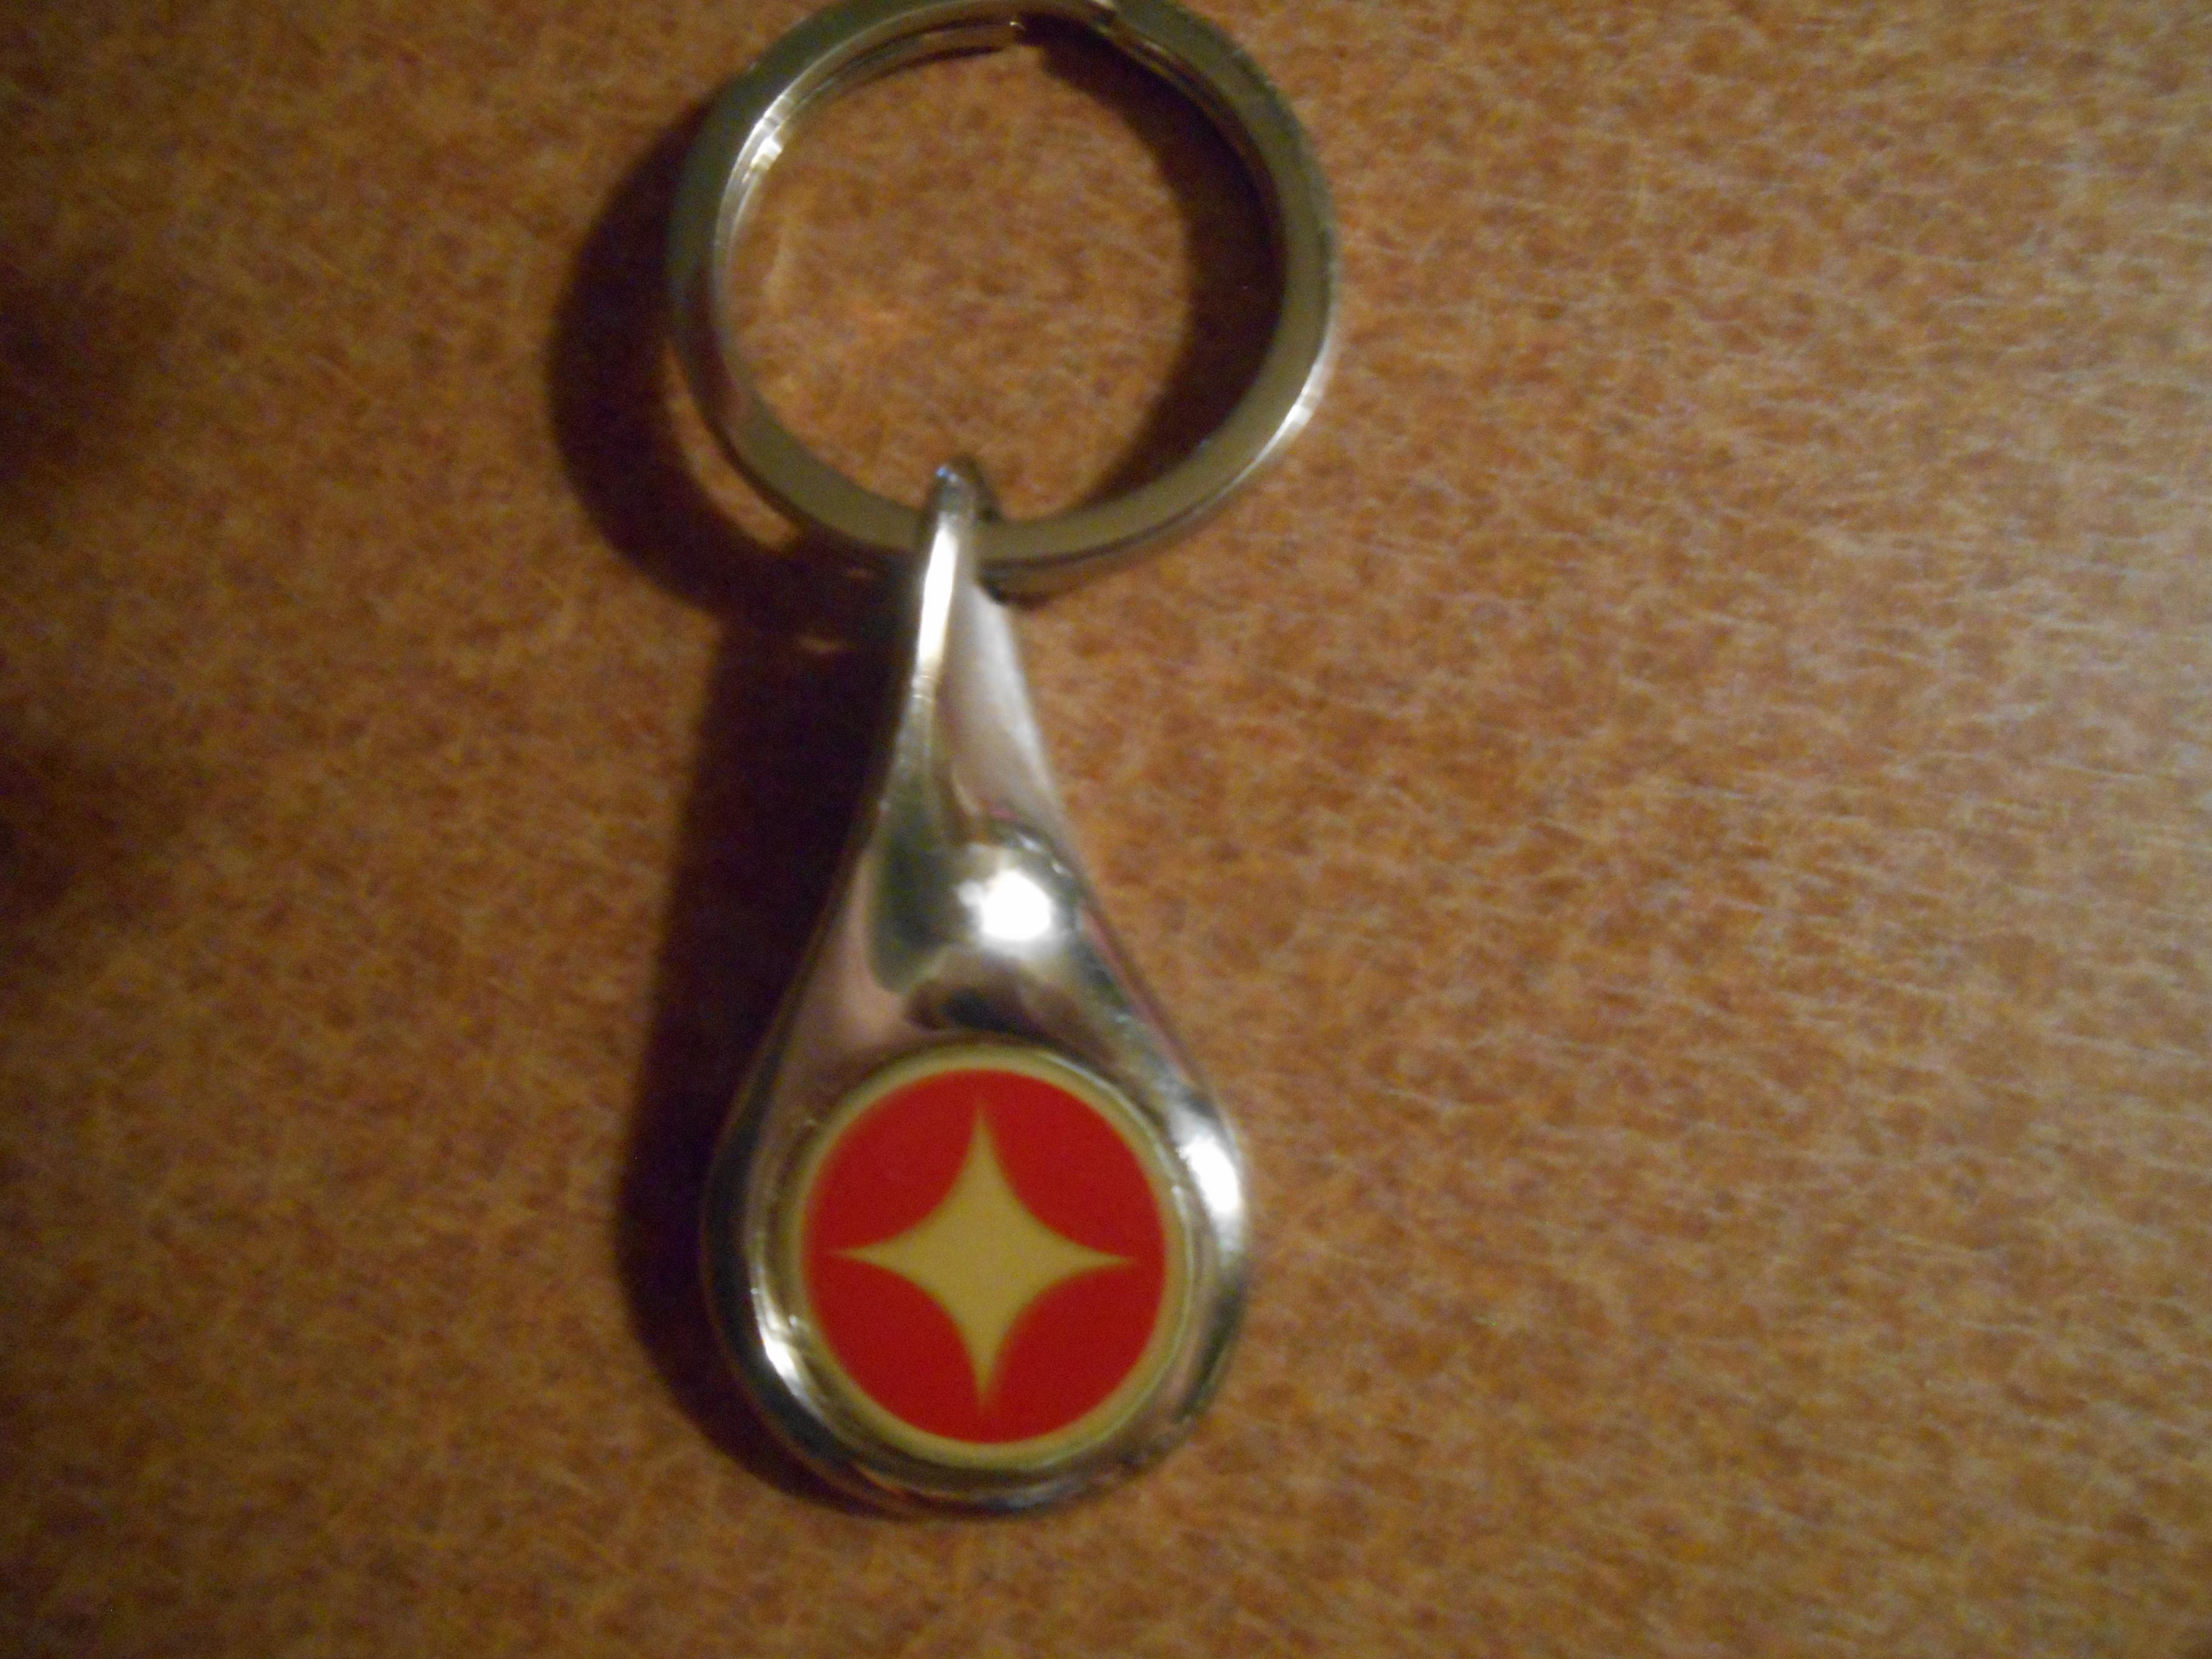 White with Red Tear Drop Logo - Mighty Redditors! Please help identifying this keychain logo